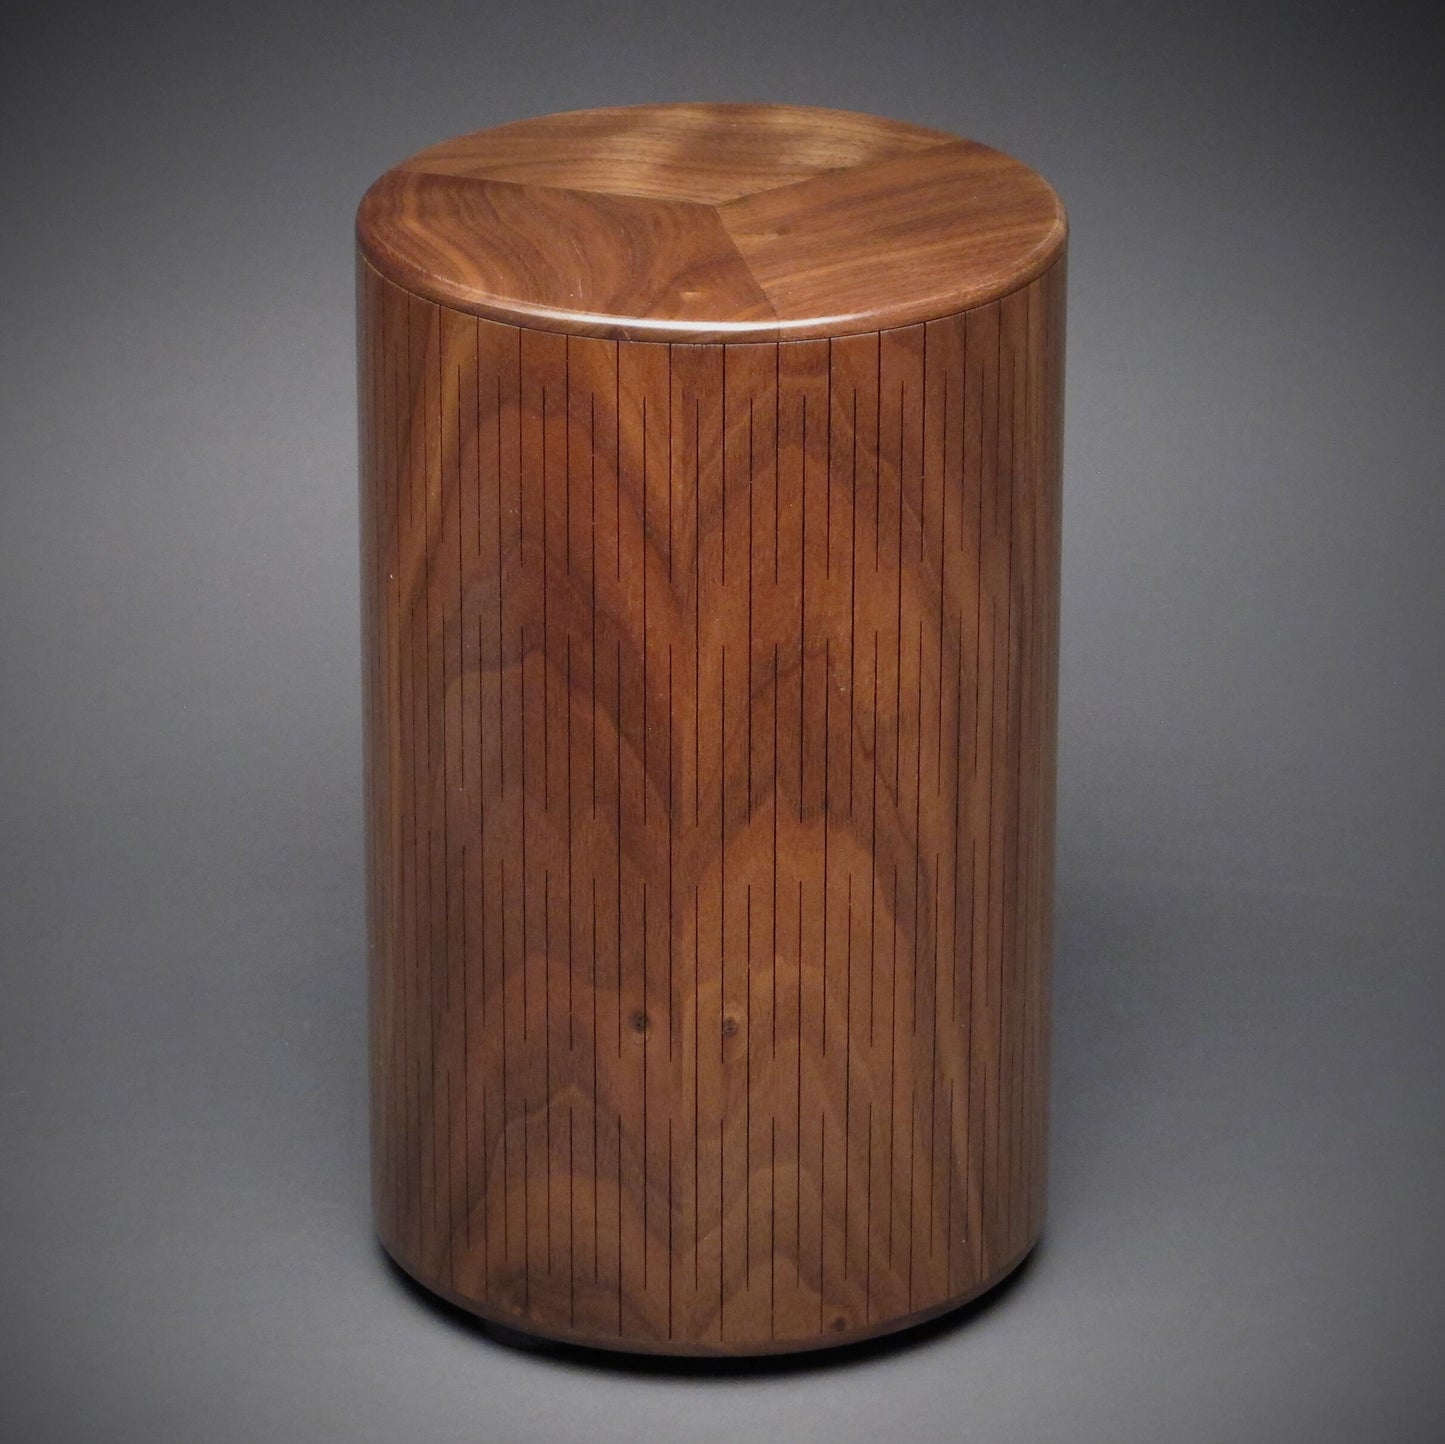 Artistic Wooden Urn for Adult Human Ashes up to 205 pounds